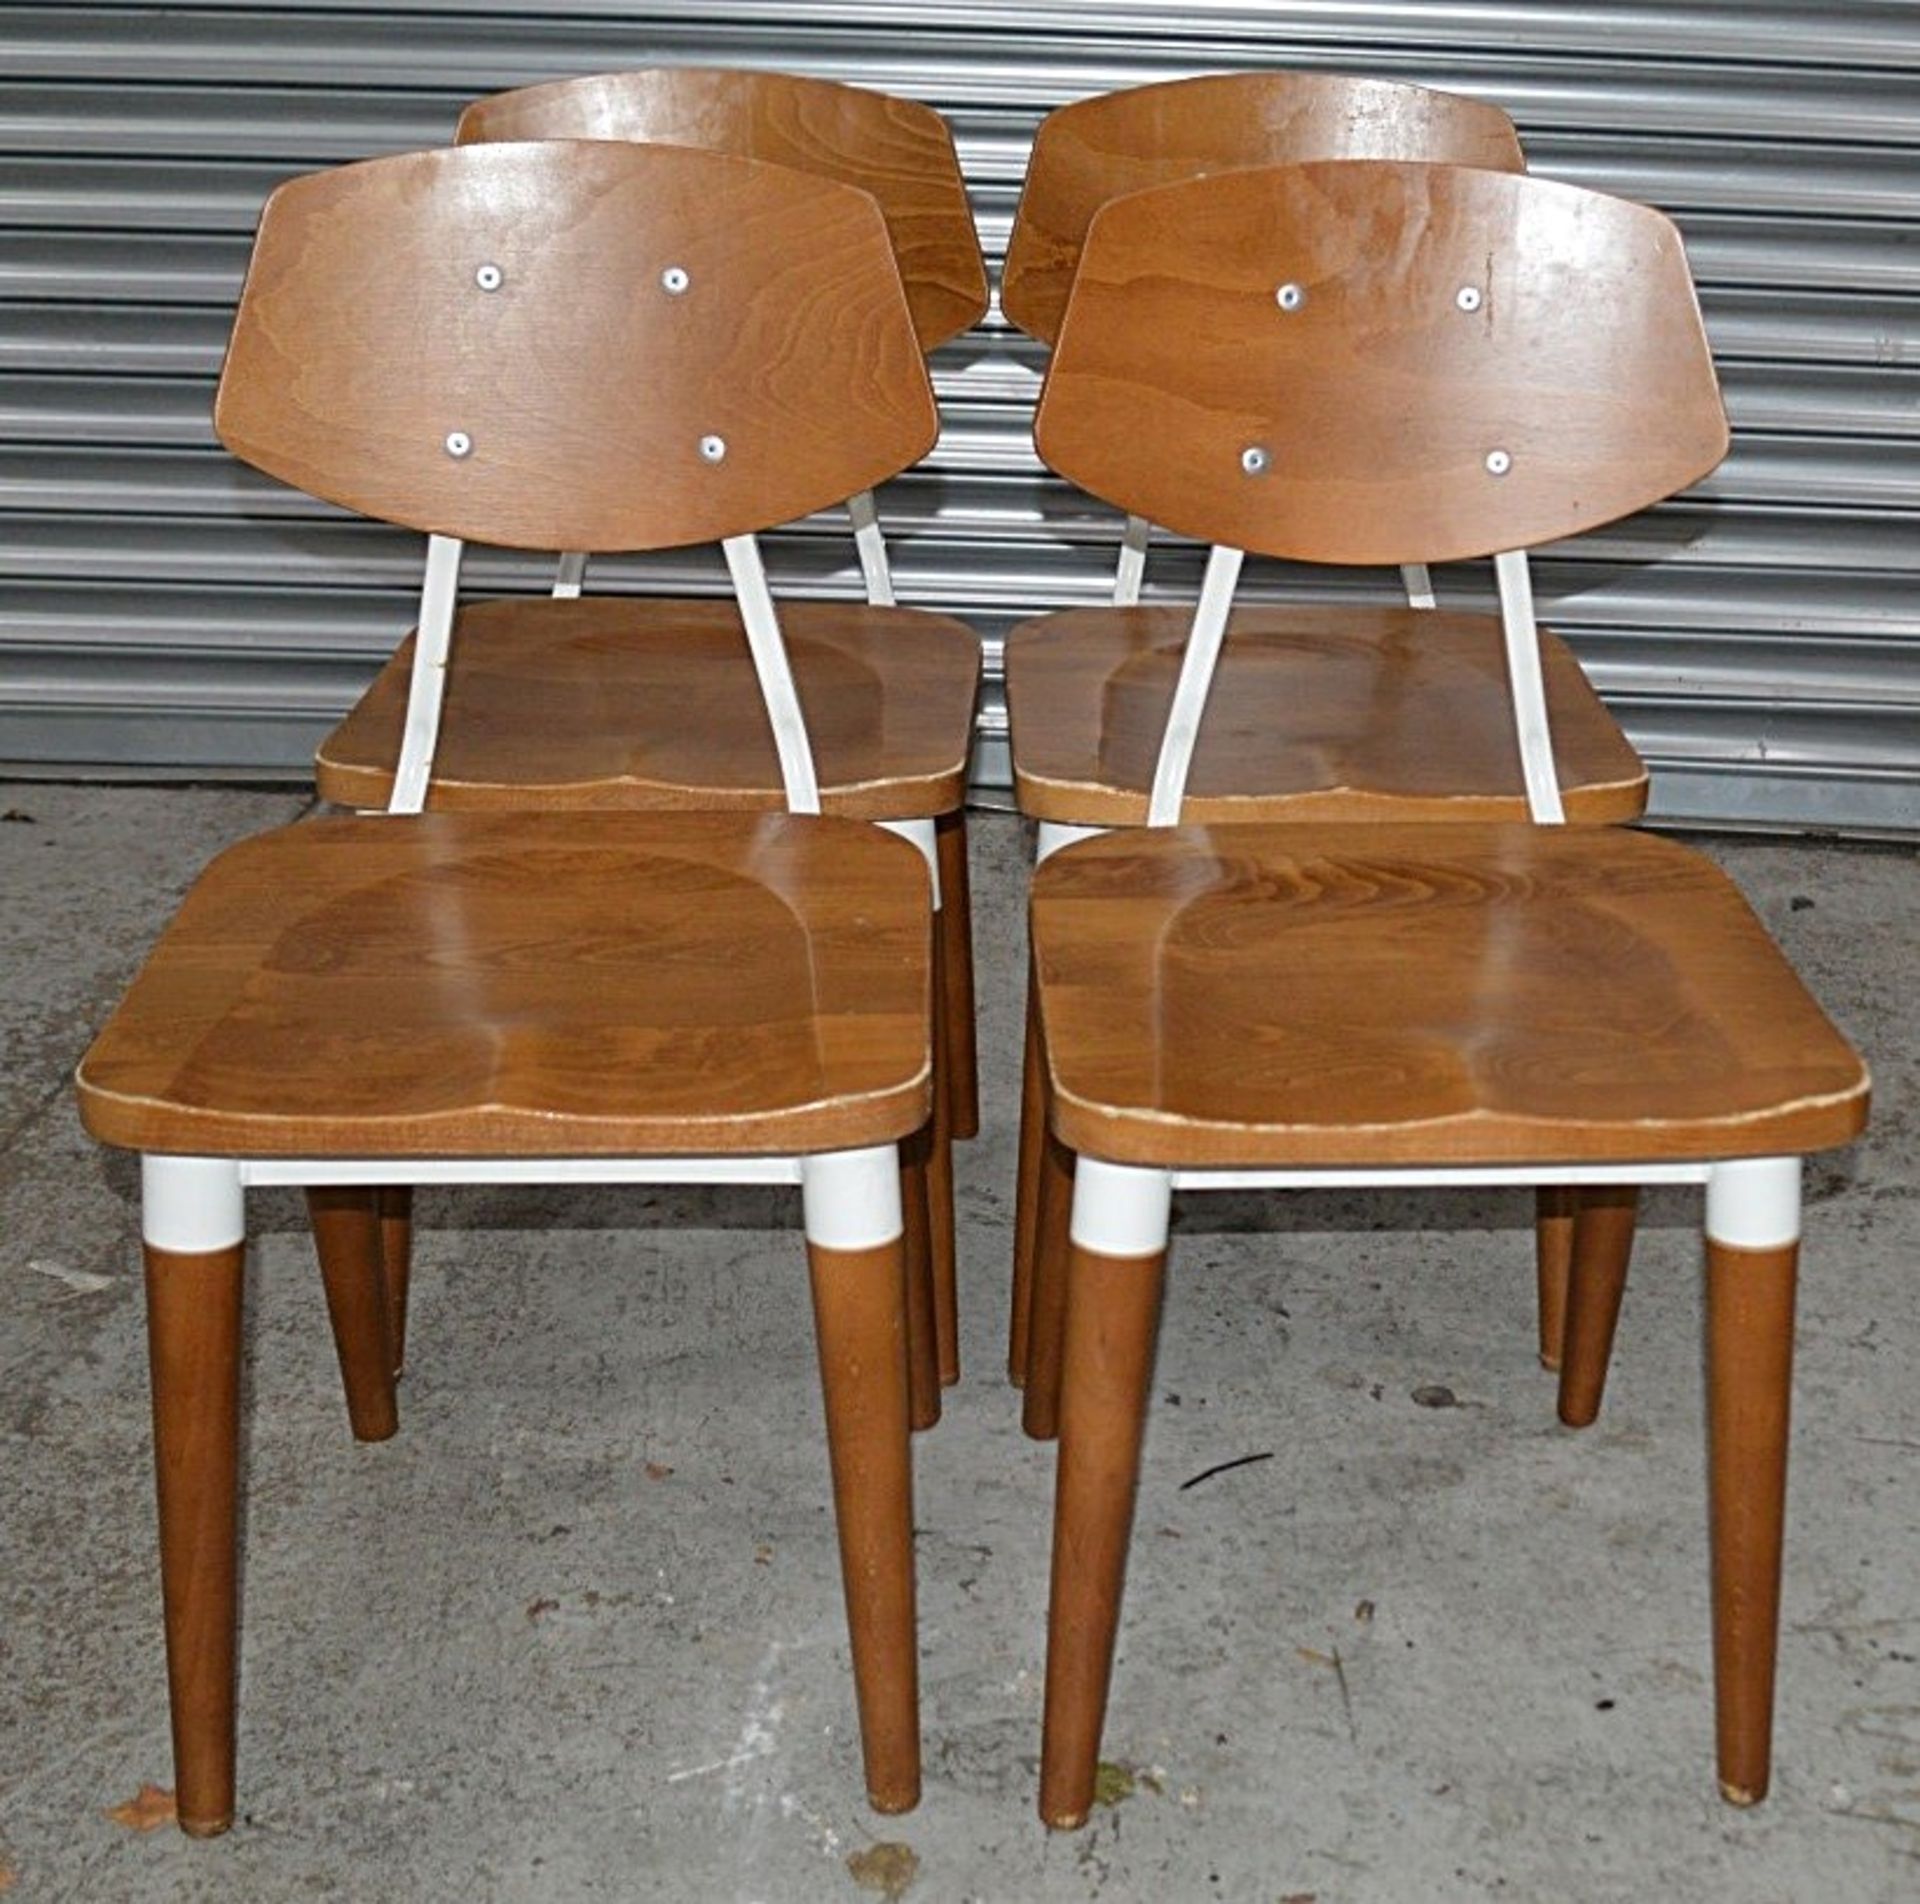 8 x Contemporary Commercial Dining Chairs With A Sturdy Wood And Metal Construction